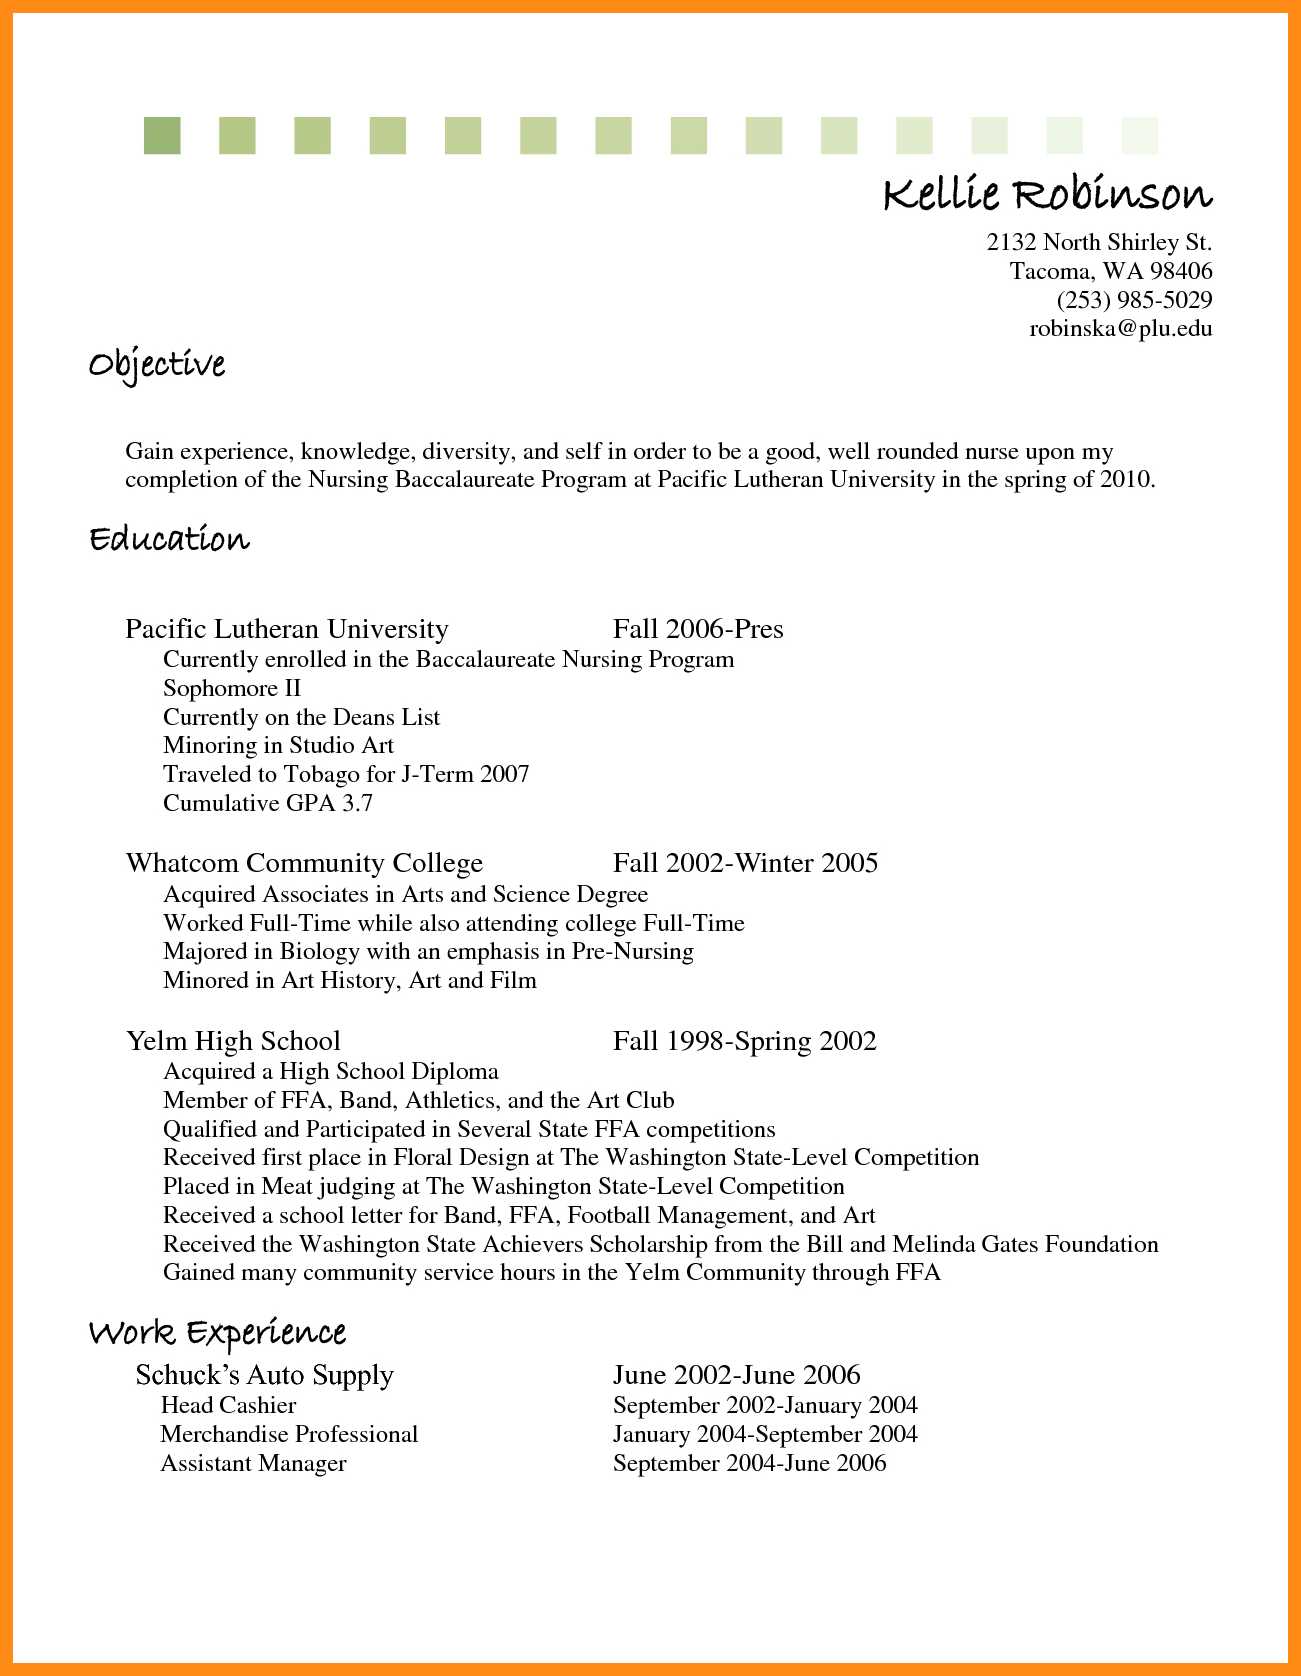 Objective For Resume Biology Resume Objective Examples Retail Resume Template Image Job Objectives New Sales Associate objective for resume|wikiresume.com